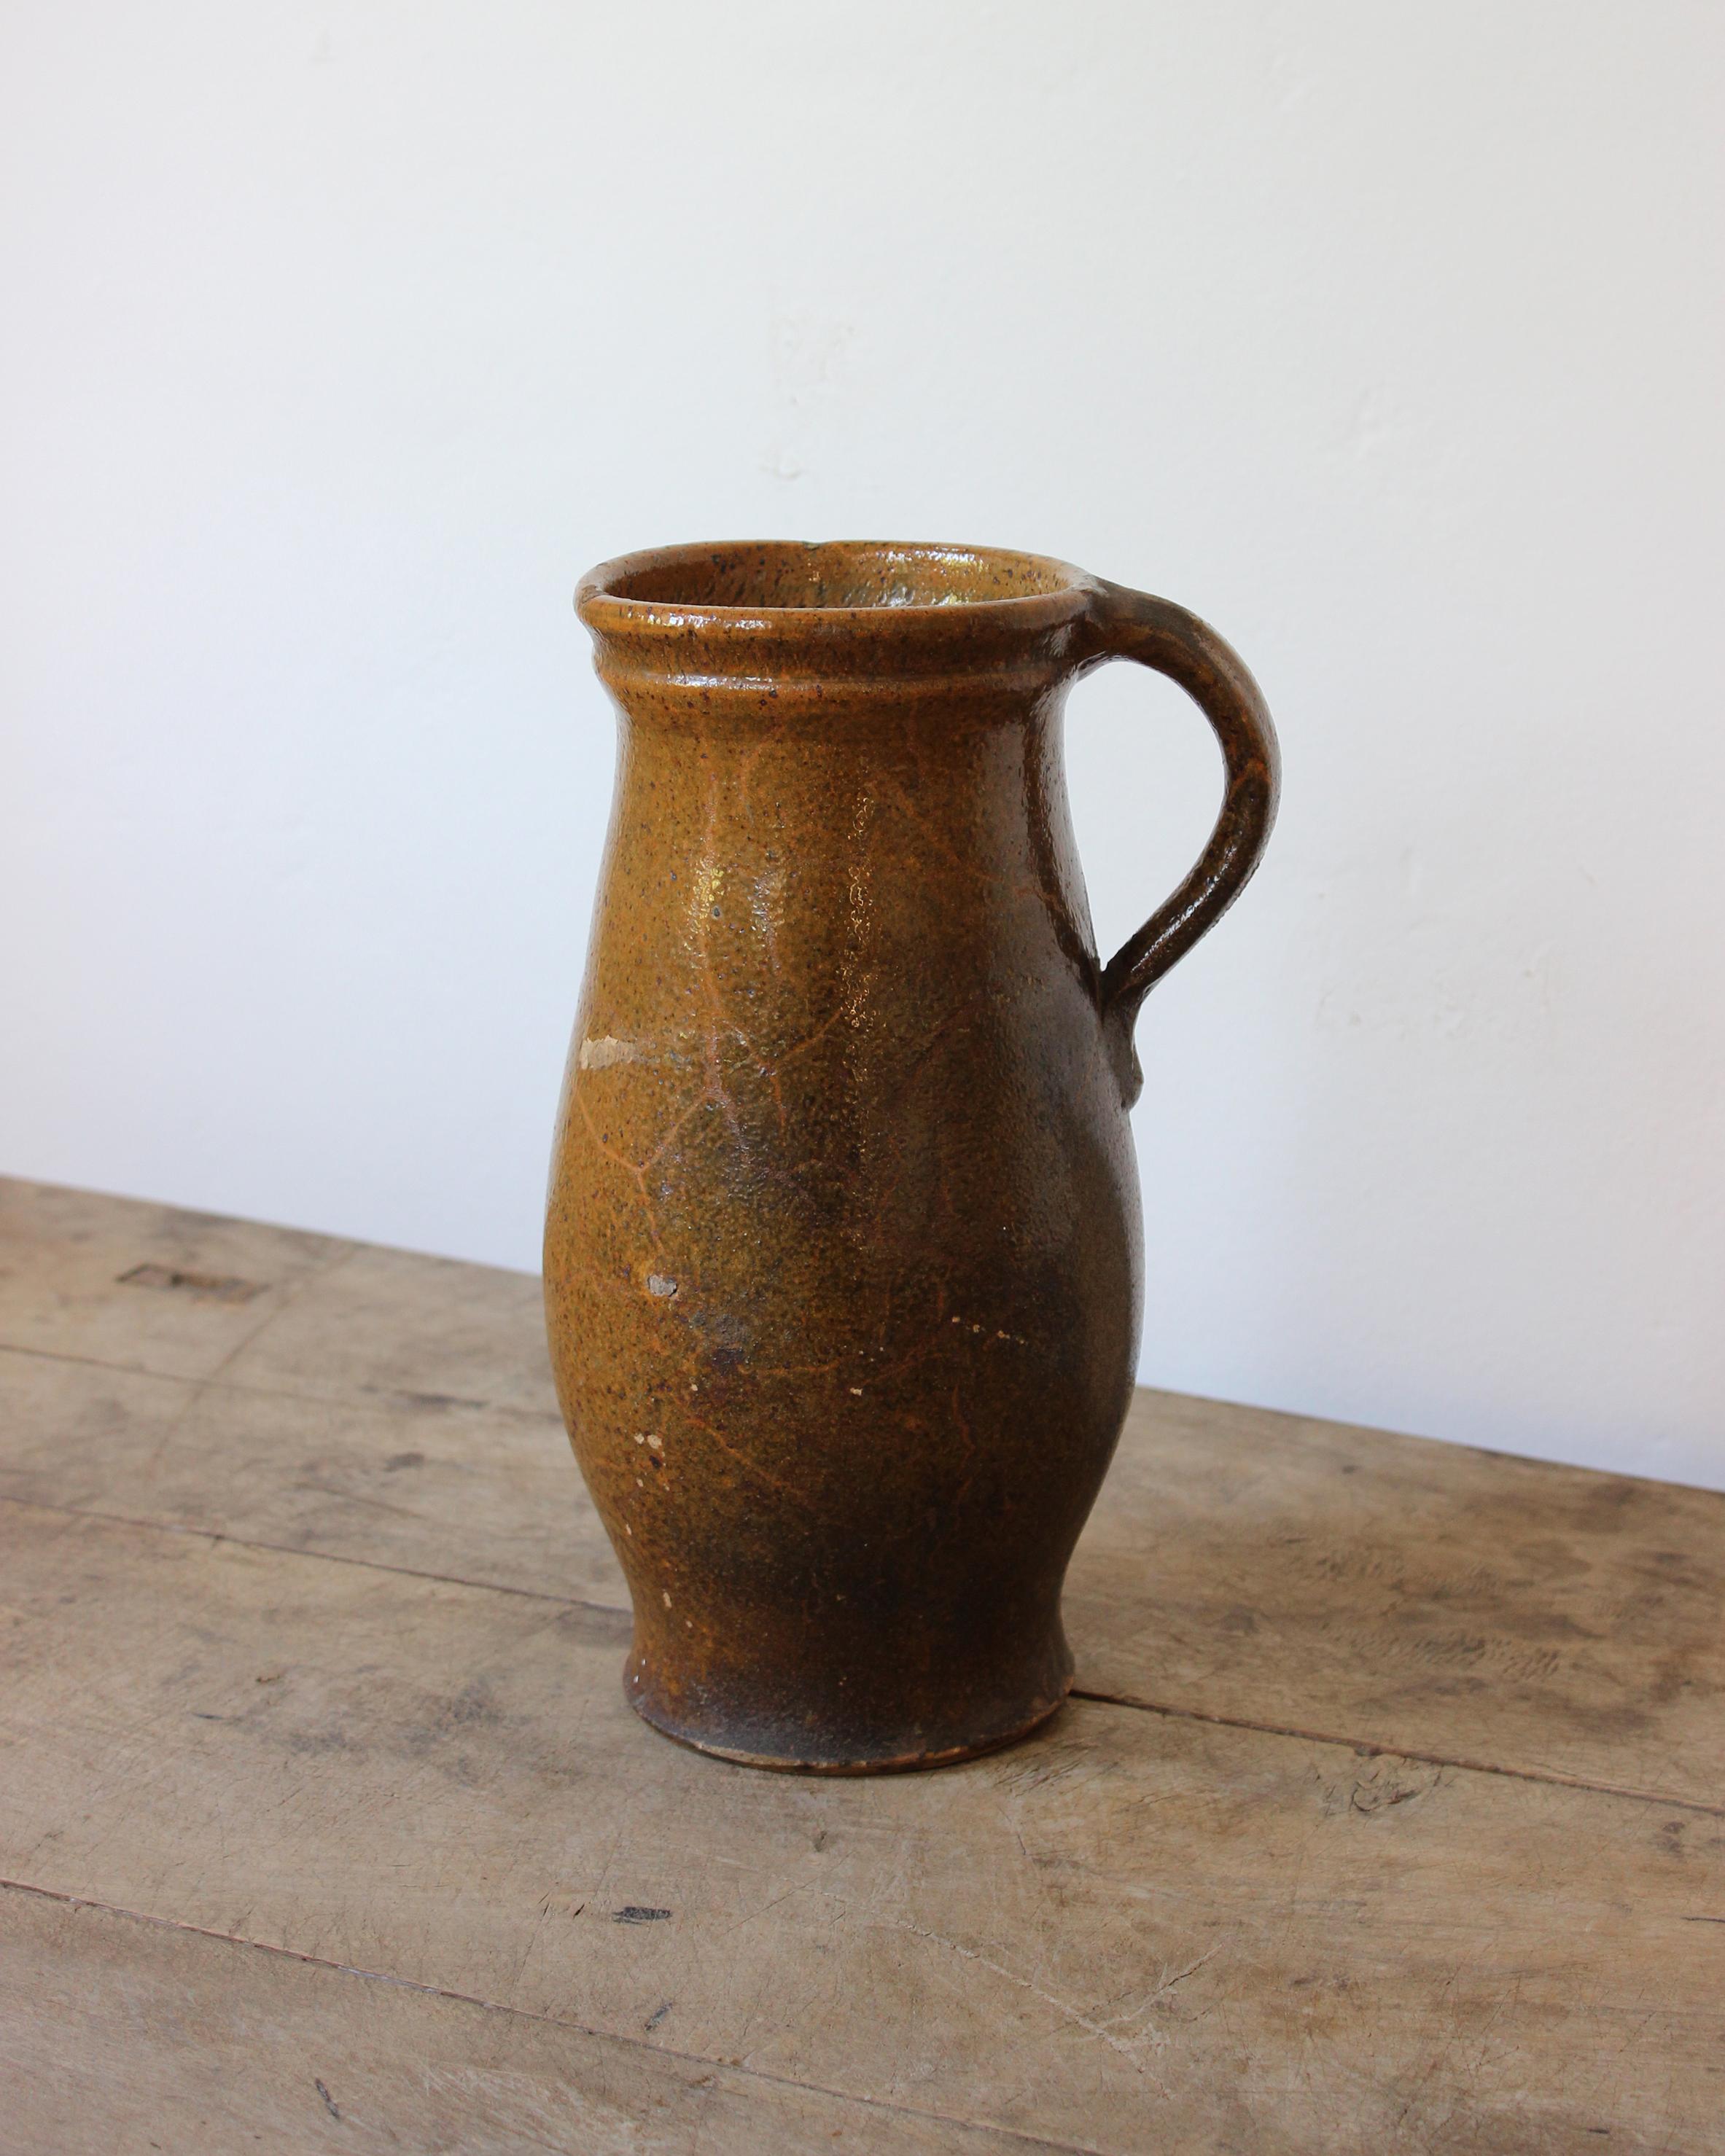 Antique pitcher vase 
France 

18th century 

Brown glaze with a stunning patina from age.